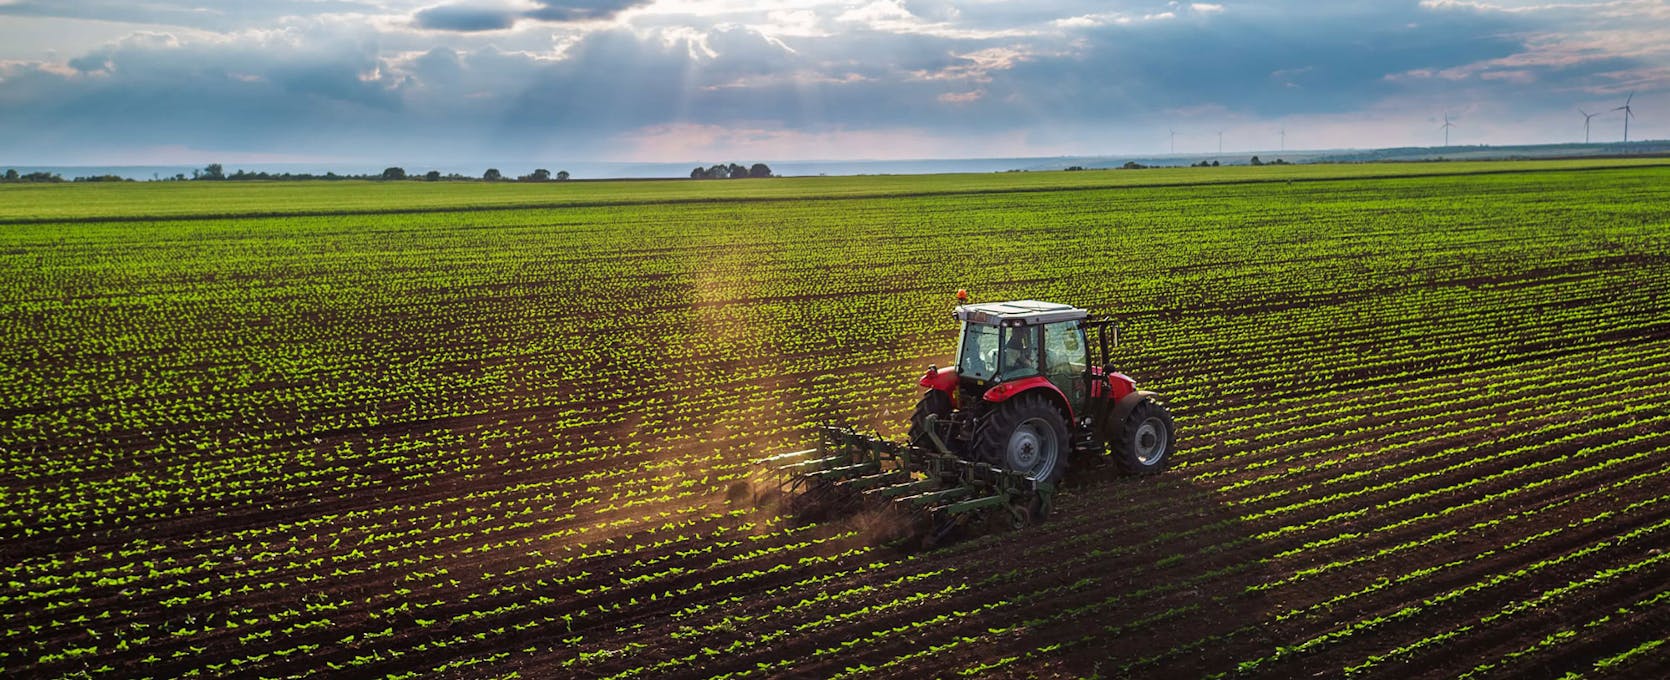 Tractor cultivating field at the heart of the agribusiness industry